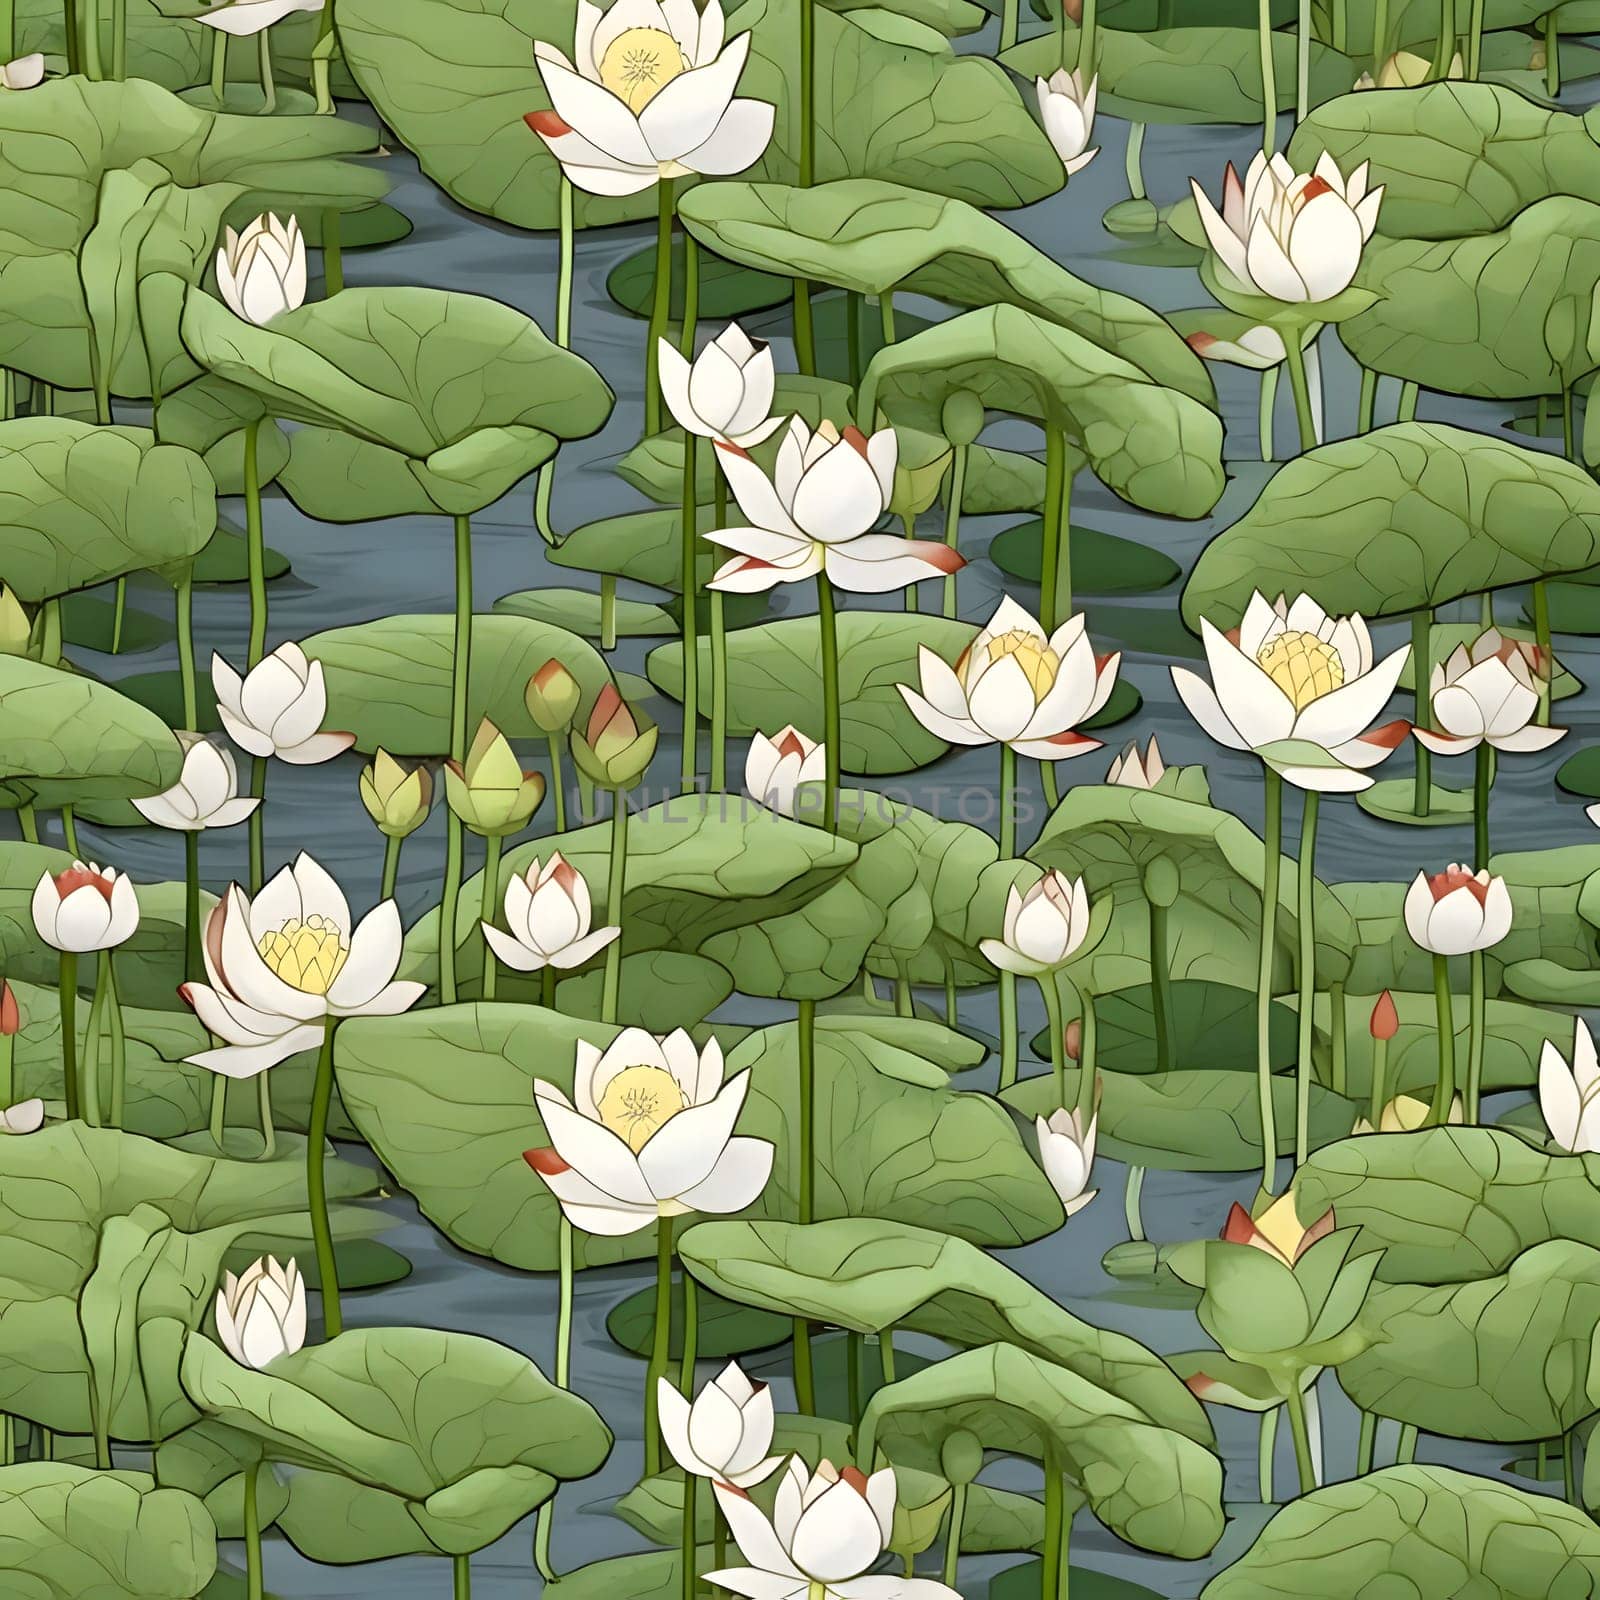 Patterns and banners backgrounds: Seamless pattern with water lily and lotus flowers.